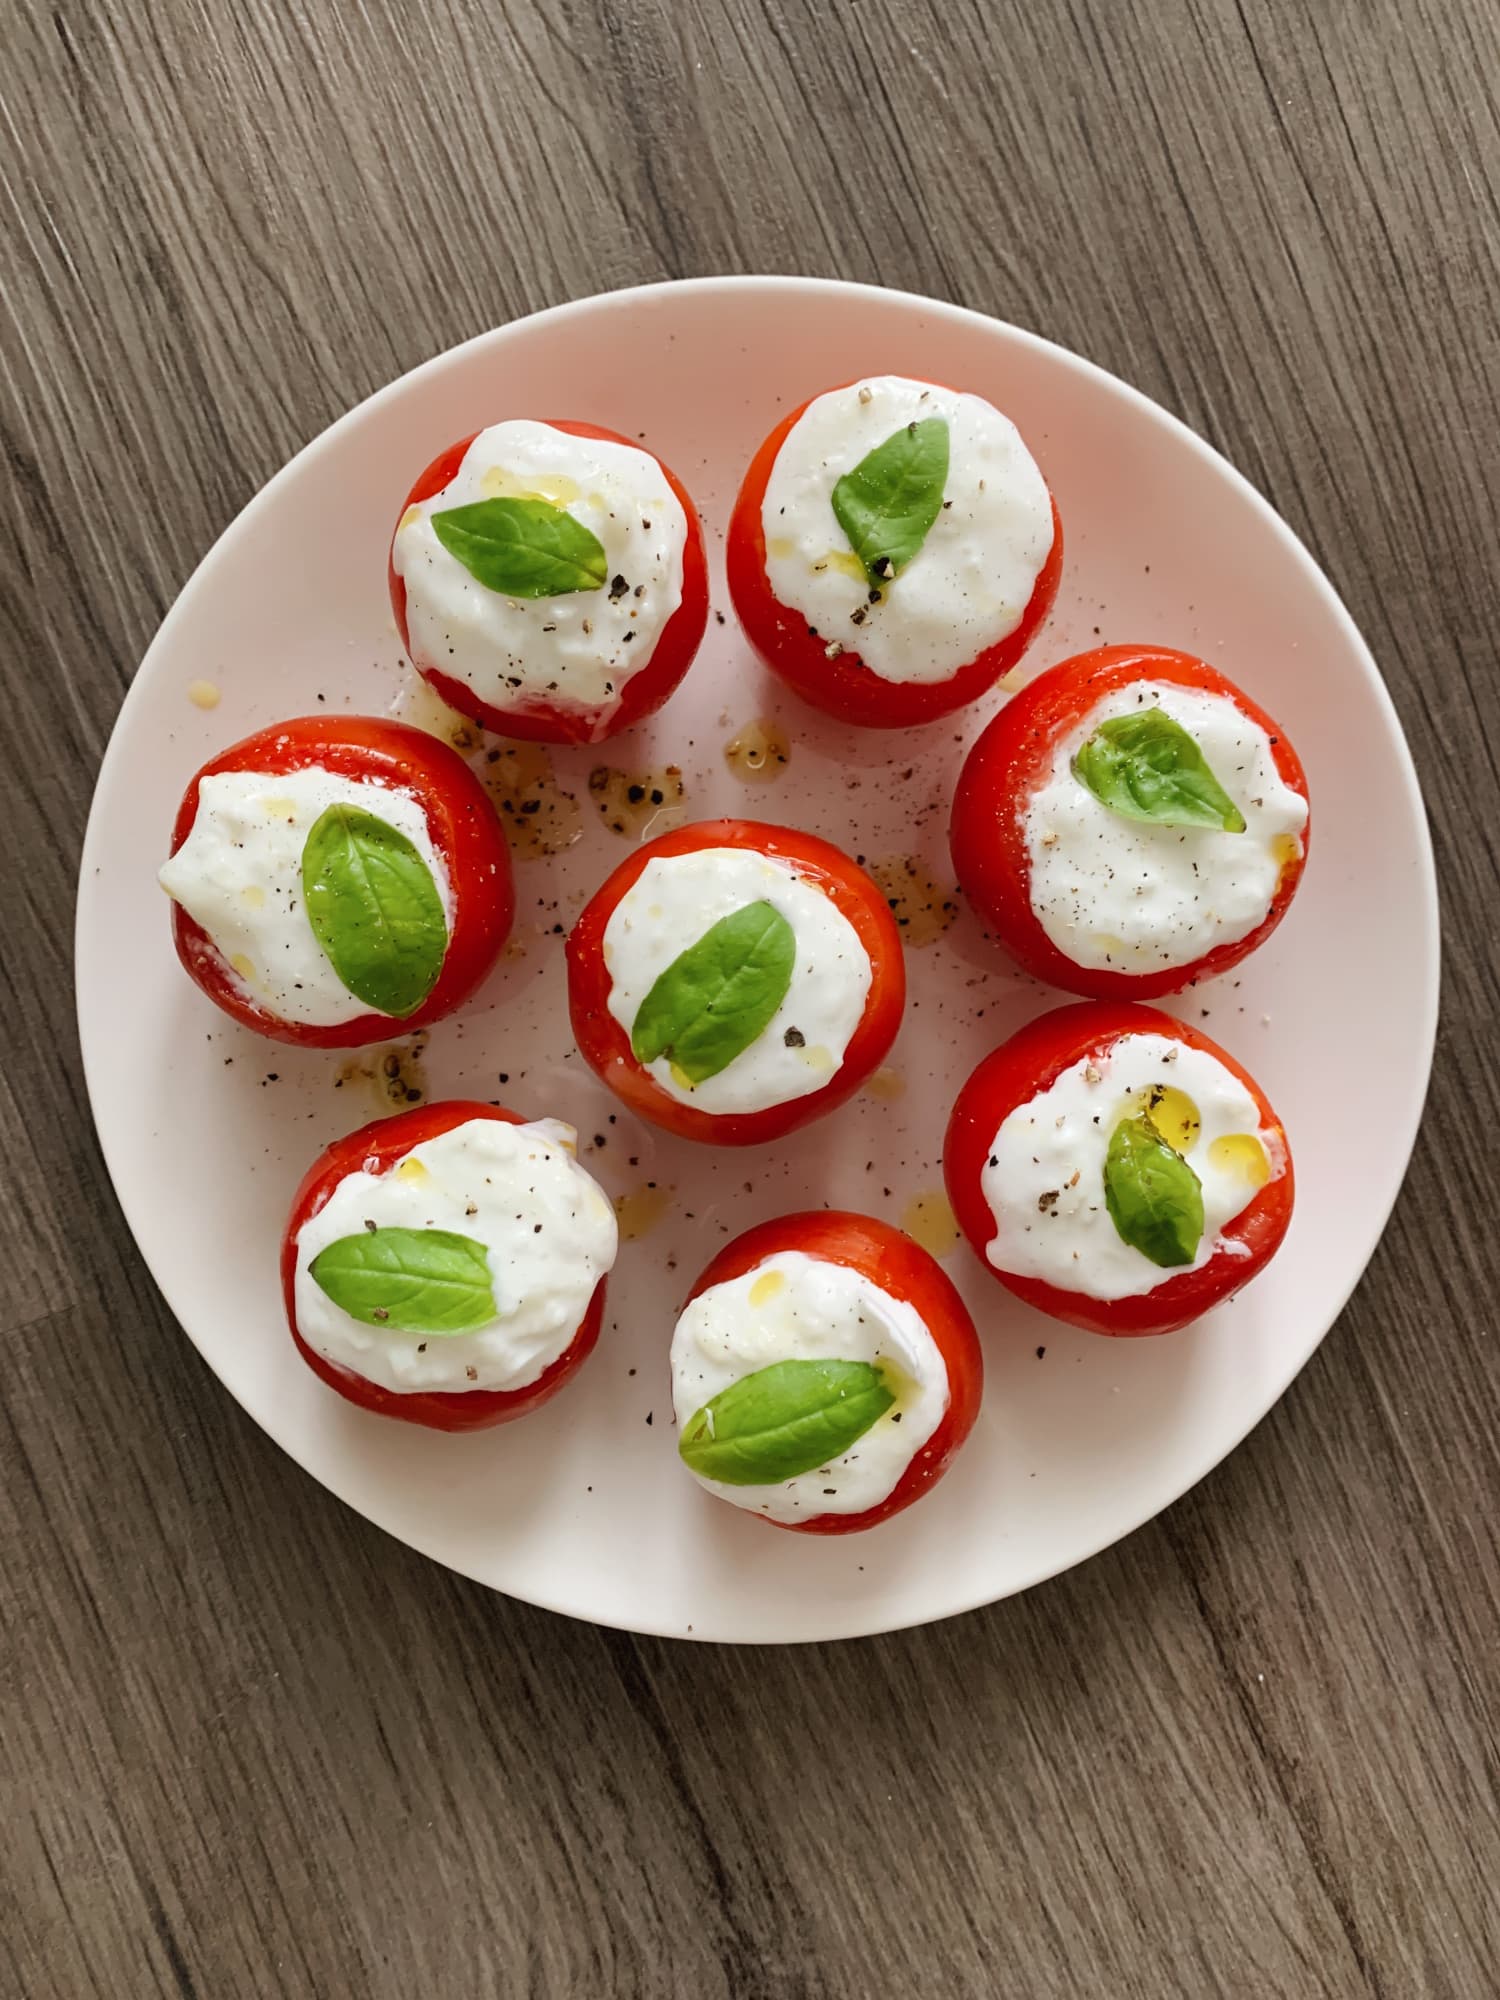 I Tried Martha Stewart’s Tomato Burrata Bites (They’re as Fast and Fancy as I’d Hoped)